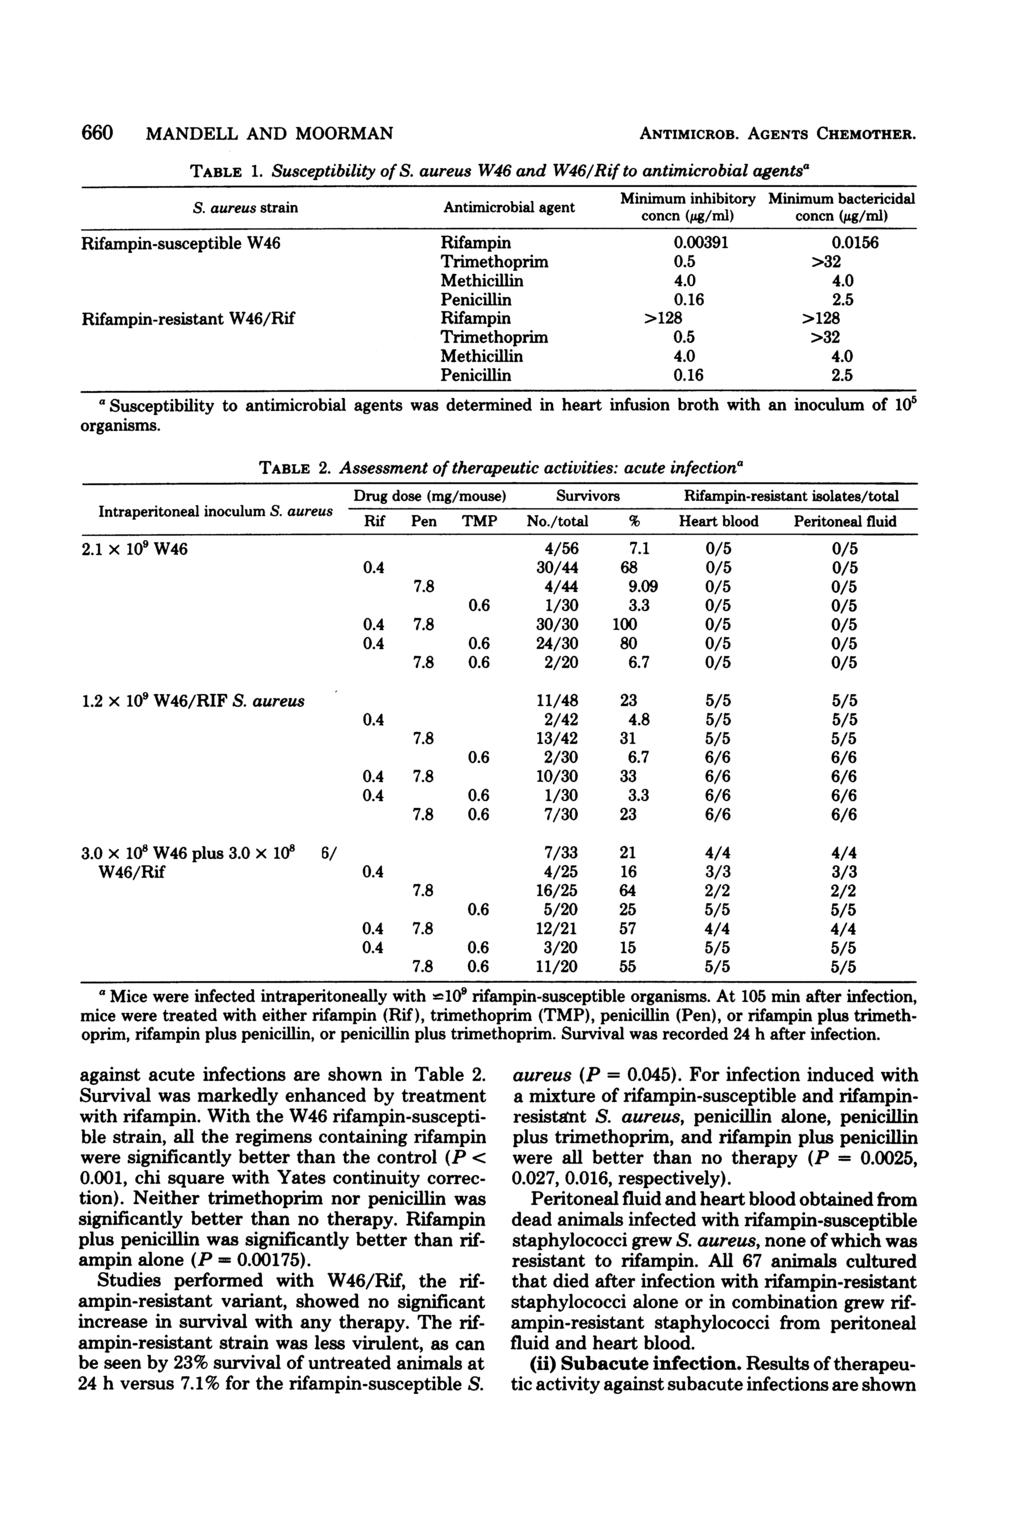 660 MANDELL AND MOORMAN TABLE 1. Susceptibility of S. aureus W46 and W46/Rif to antimicrobial agentsa S.